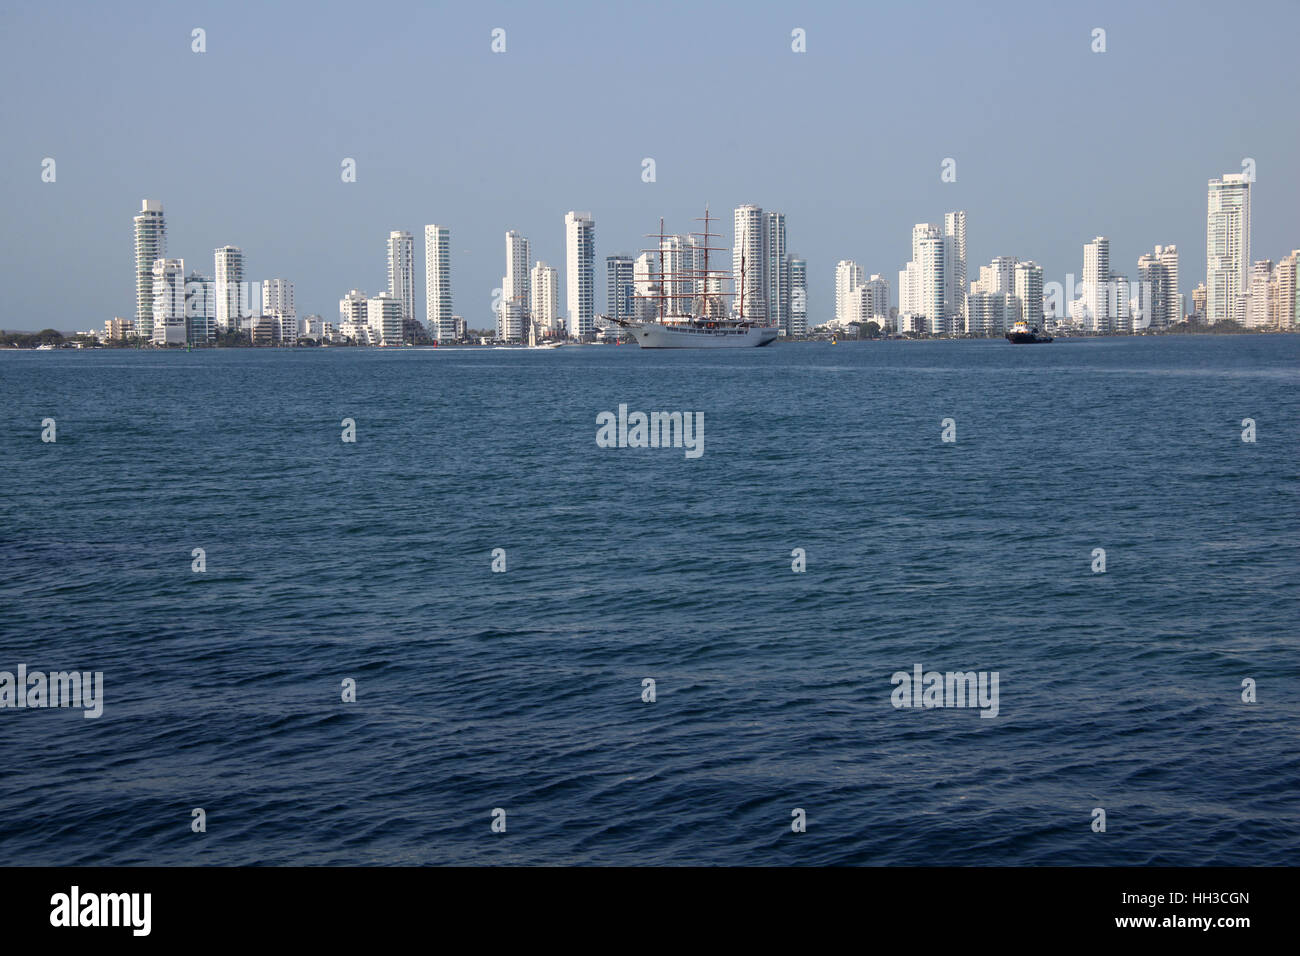 Skyline of the city of Cartagena, Colombia over the Caribbean ocean port entrance, South America. Stock Photo